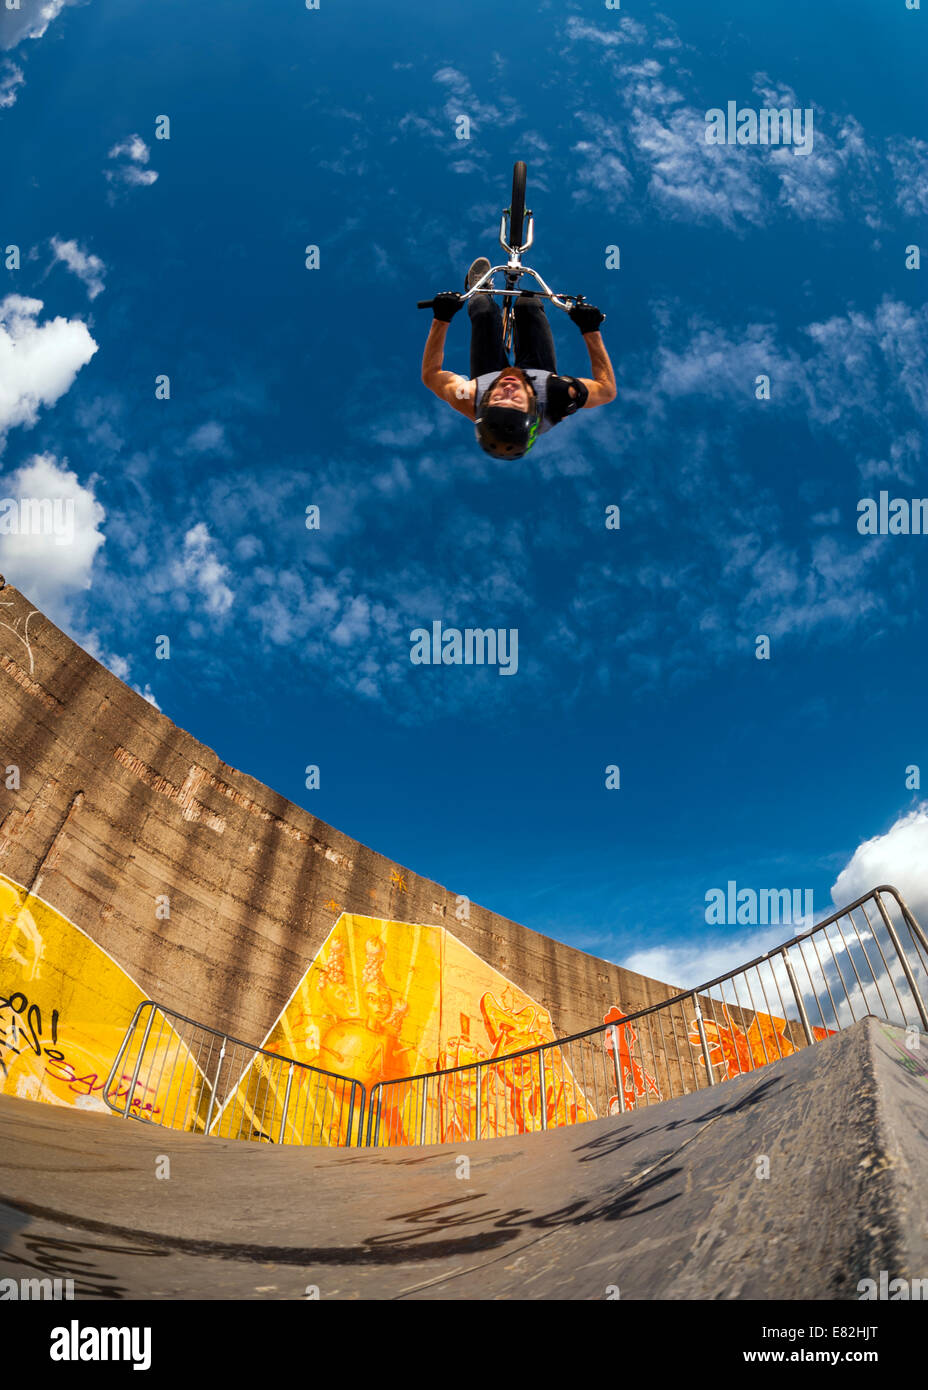 Germany, Young man performing stunt on BMX bike Stock Photo